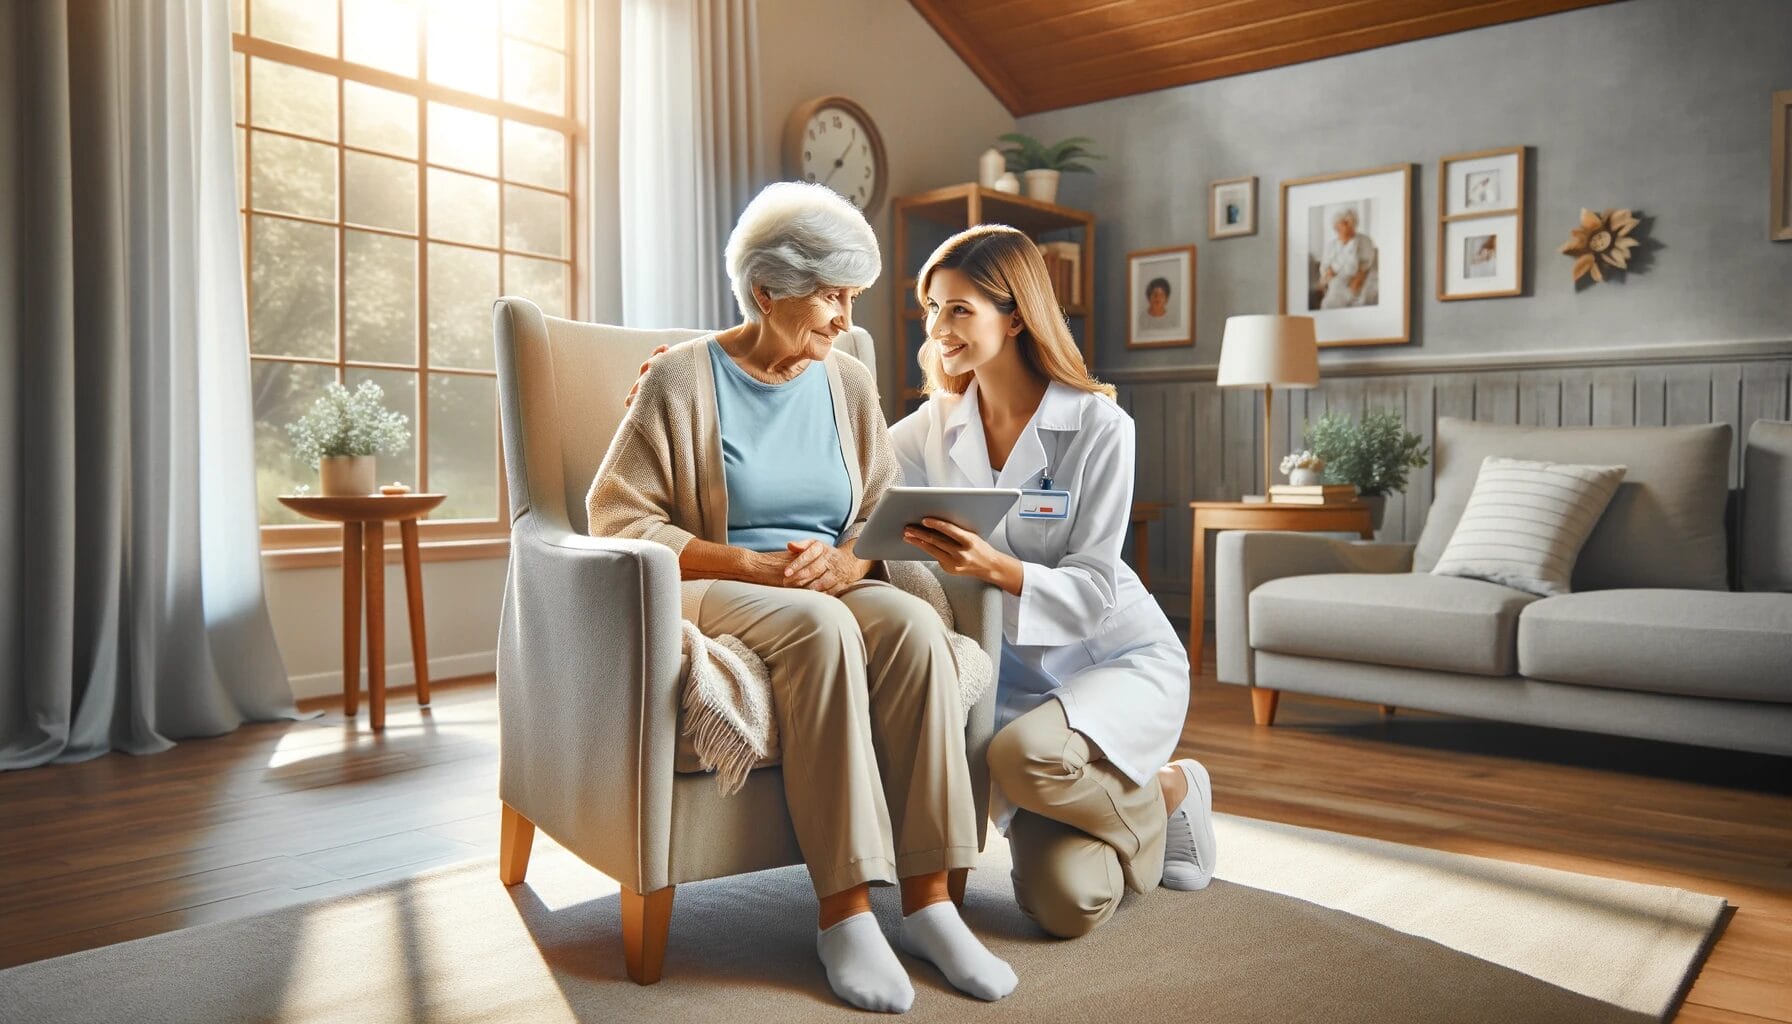 2nd Family caregiver showing an elderly woman a clipboard